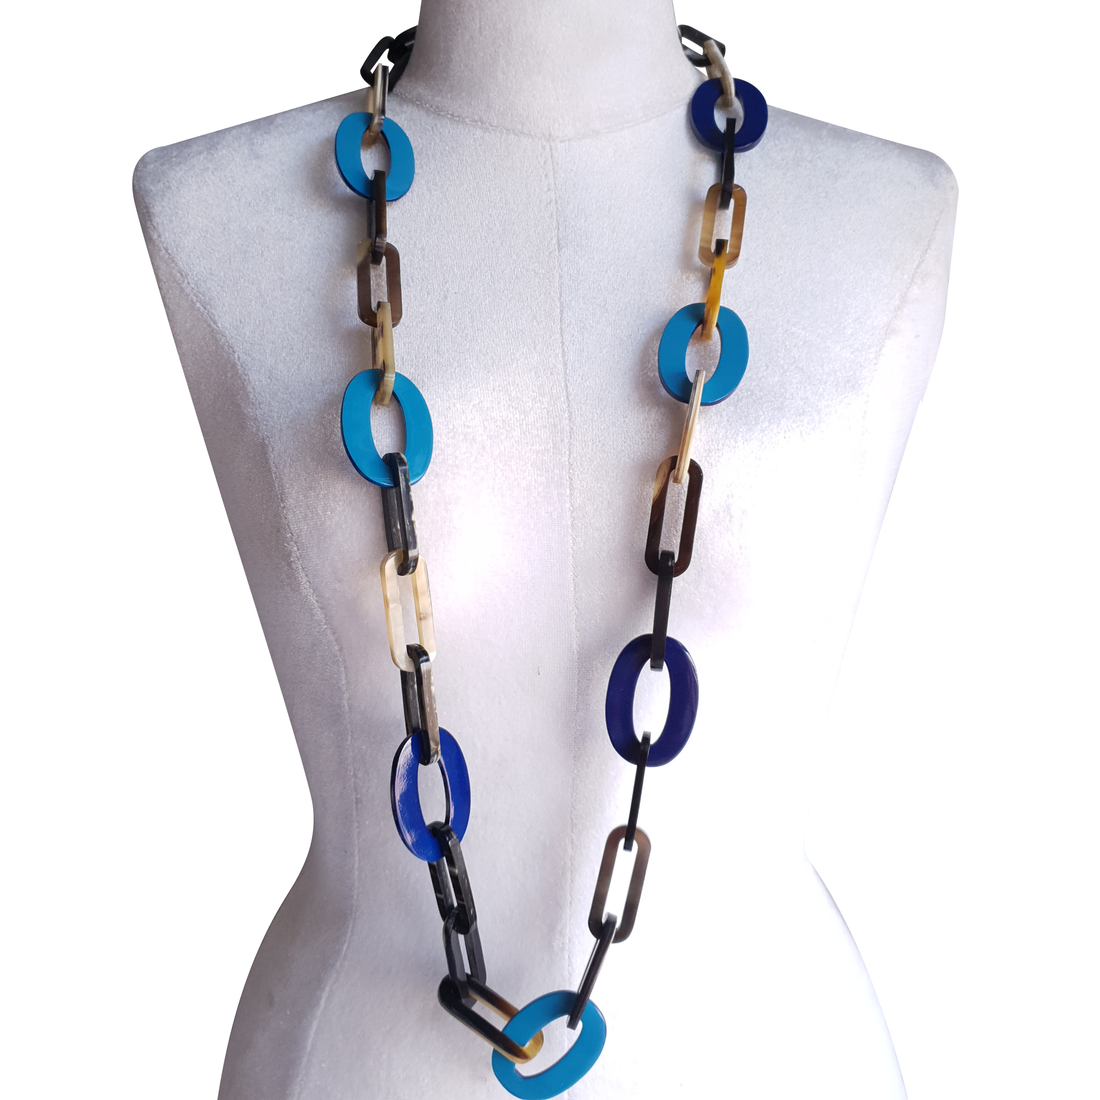 The necklace has several large sky blue and classic blue pieces in natural light, impressive gift for her